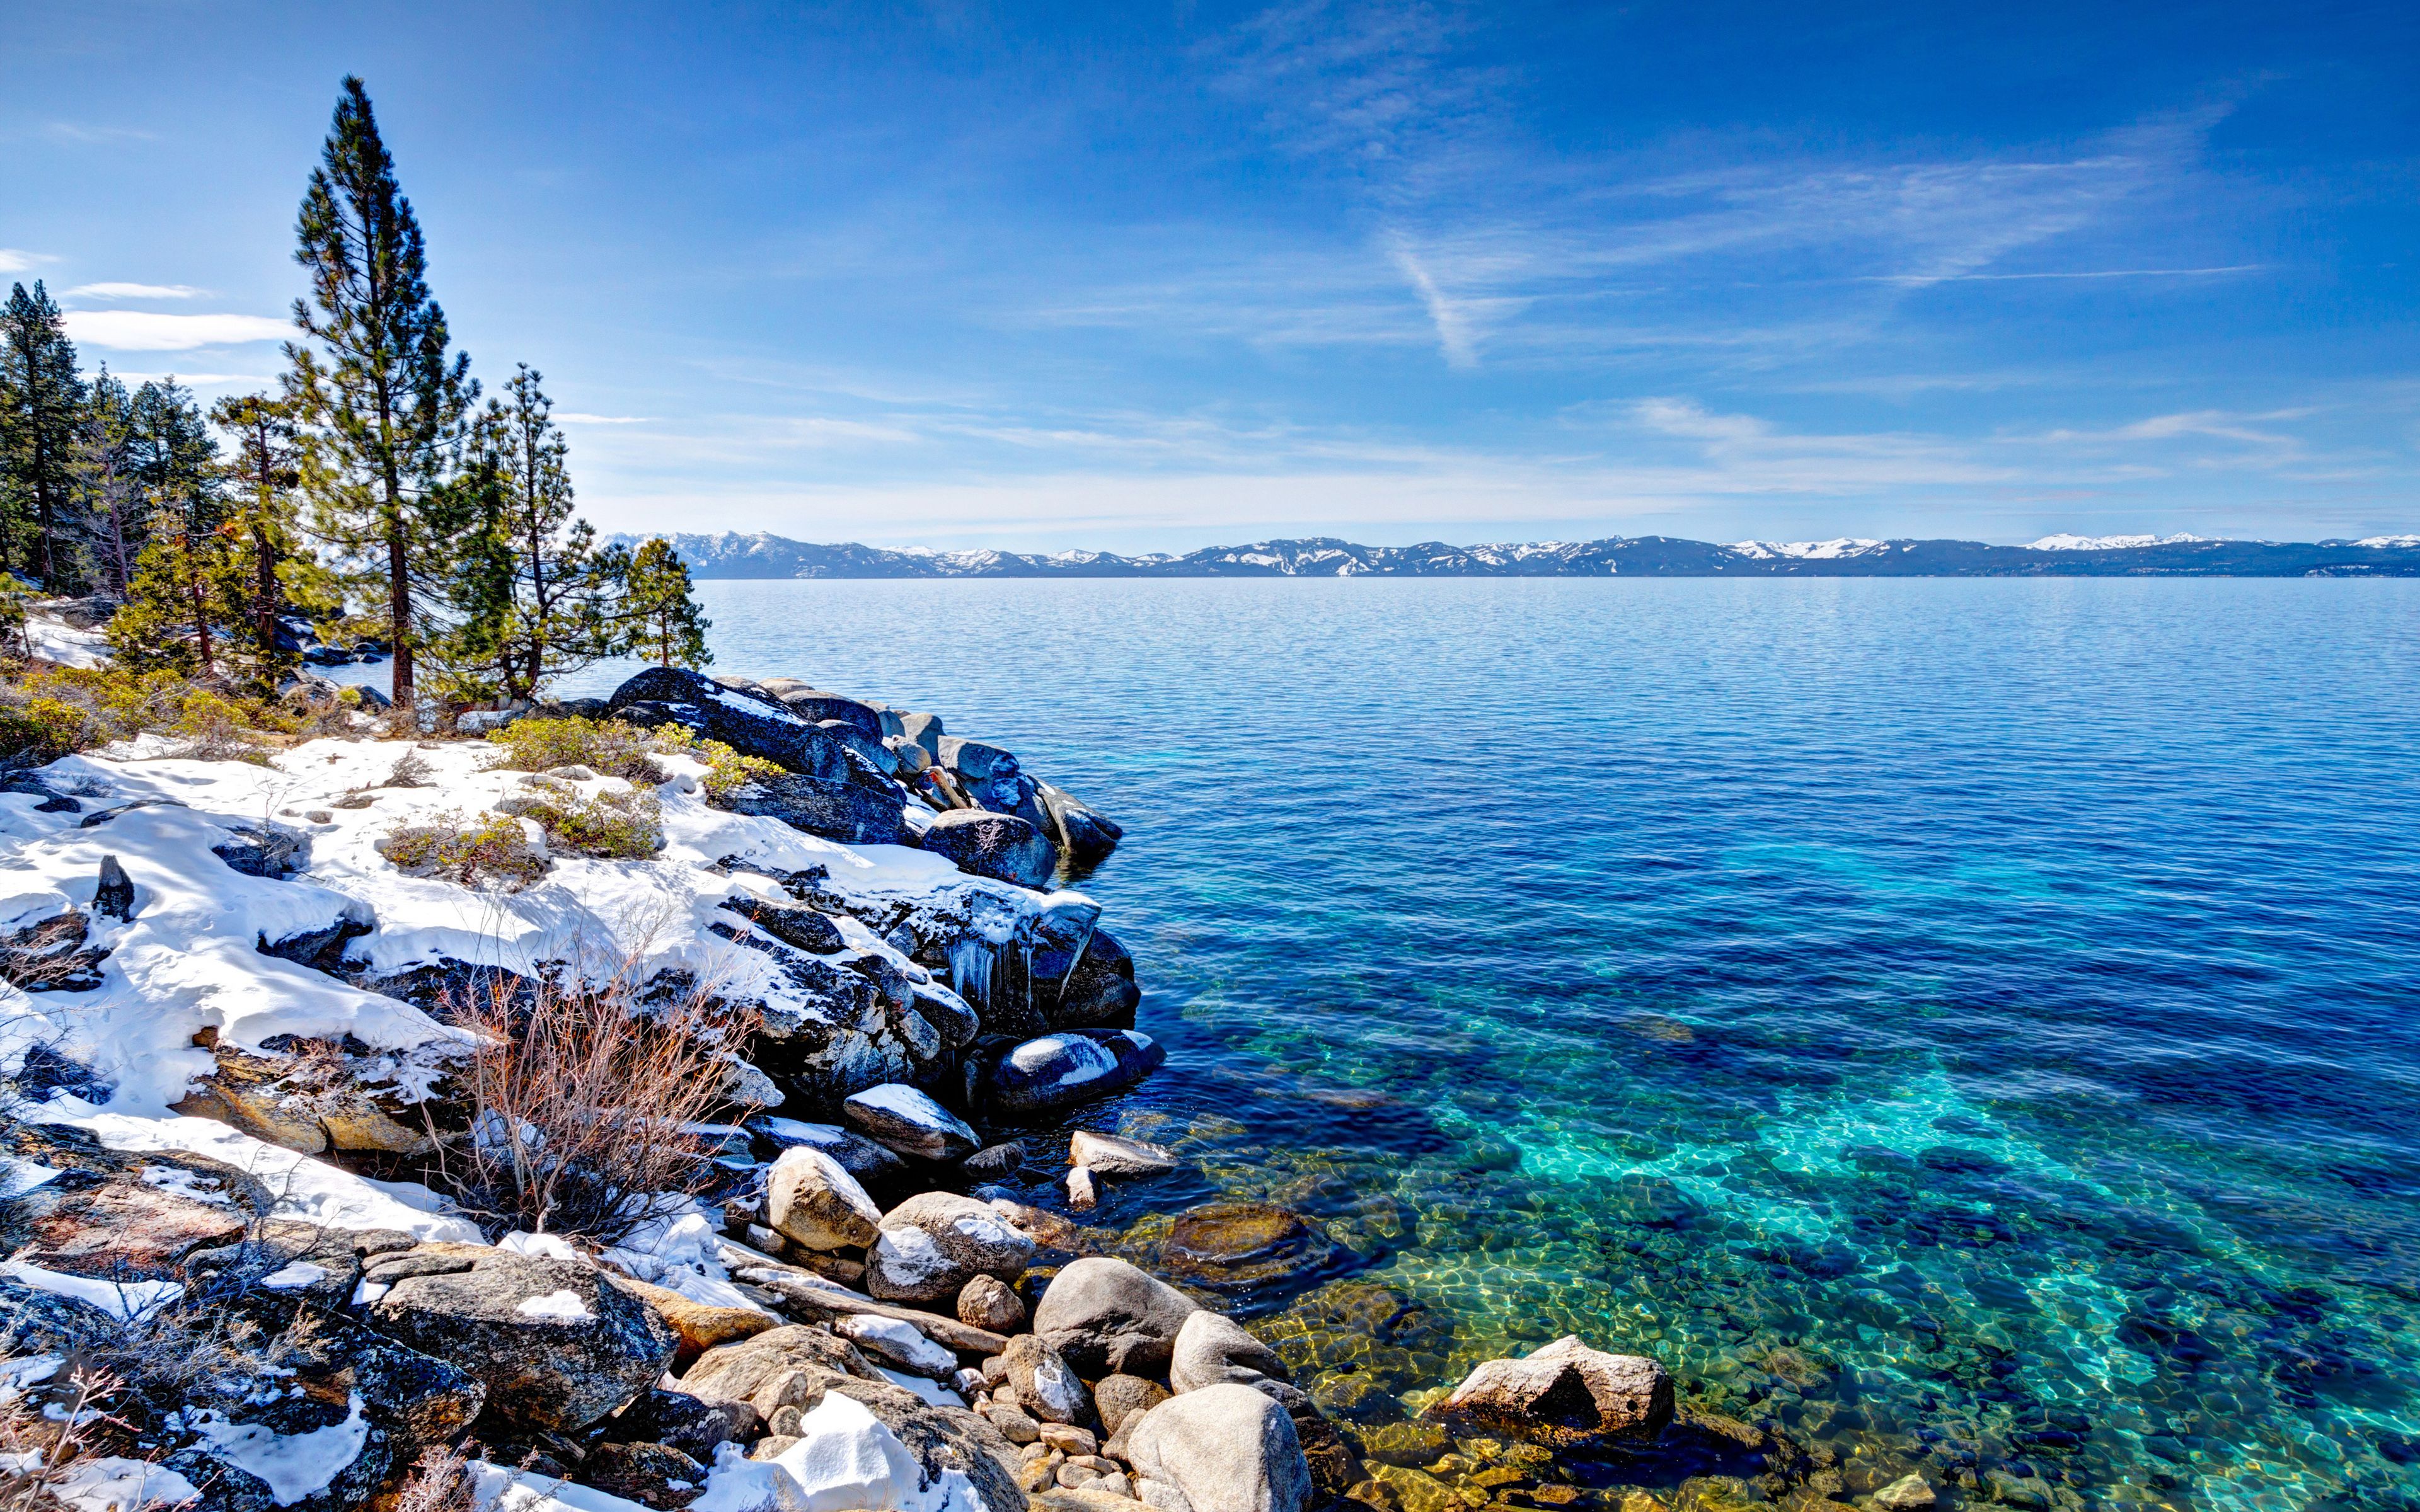 3840x2400 Download Wallpaper Lake Tahoe 4k Mountain Lake Winter Coast Emerald Bay State Park Usa California For Desktop With Resolution 3840x2400 High Quality Hd Picture Wallpaper